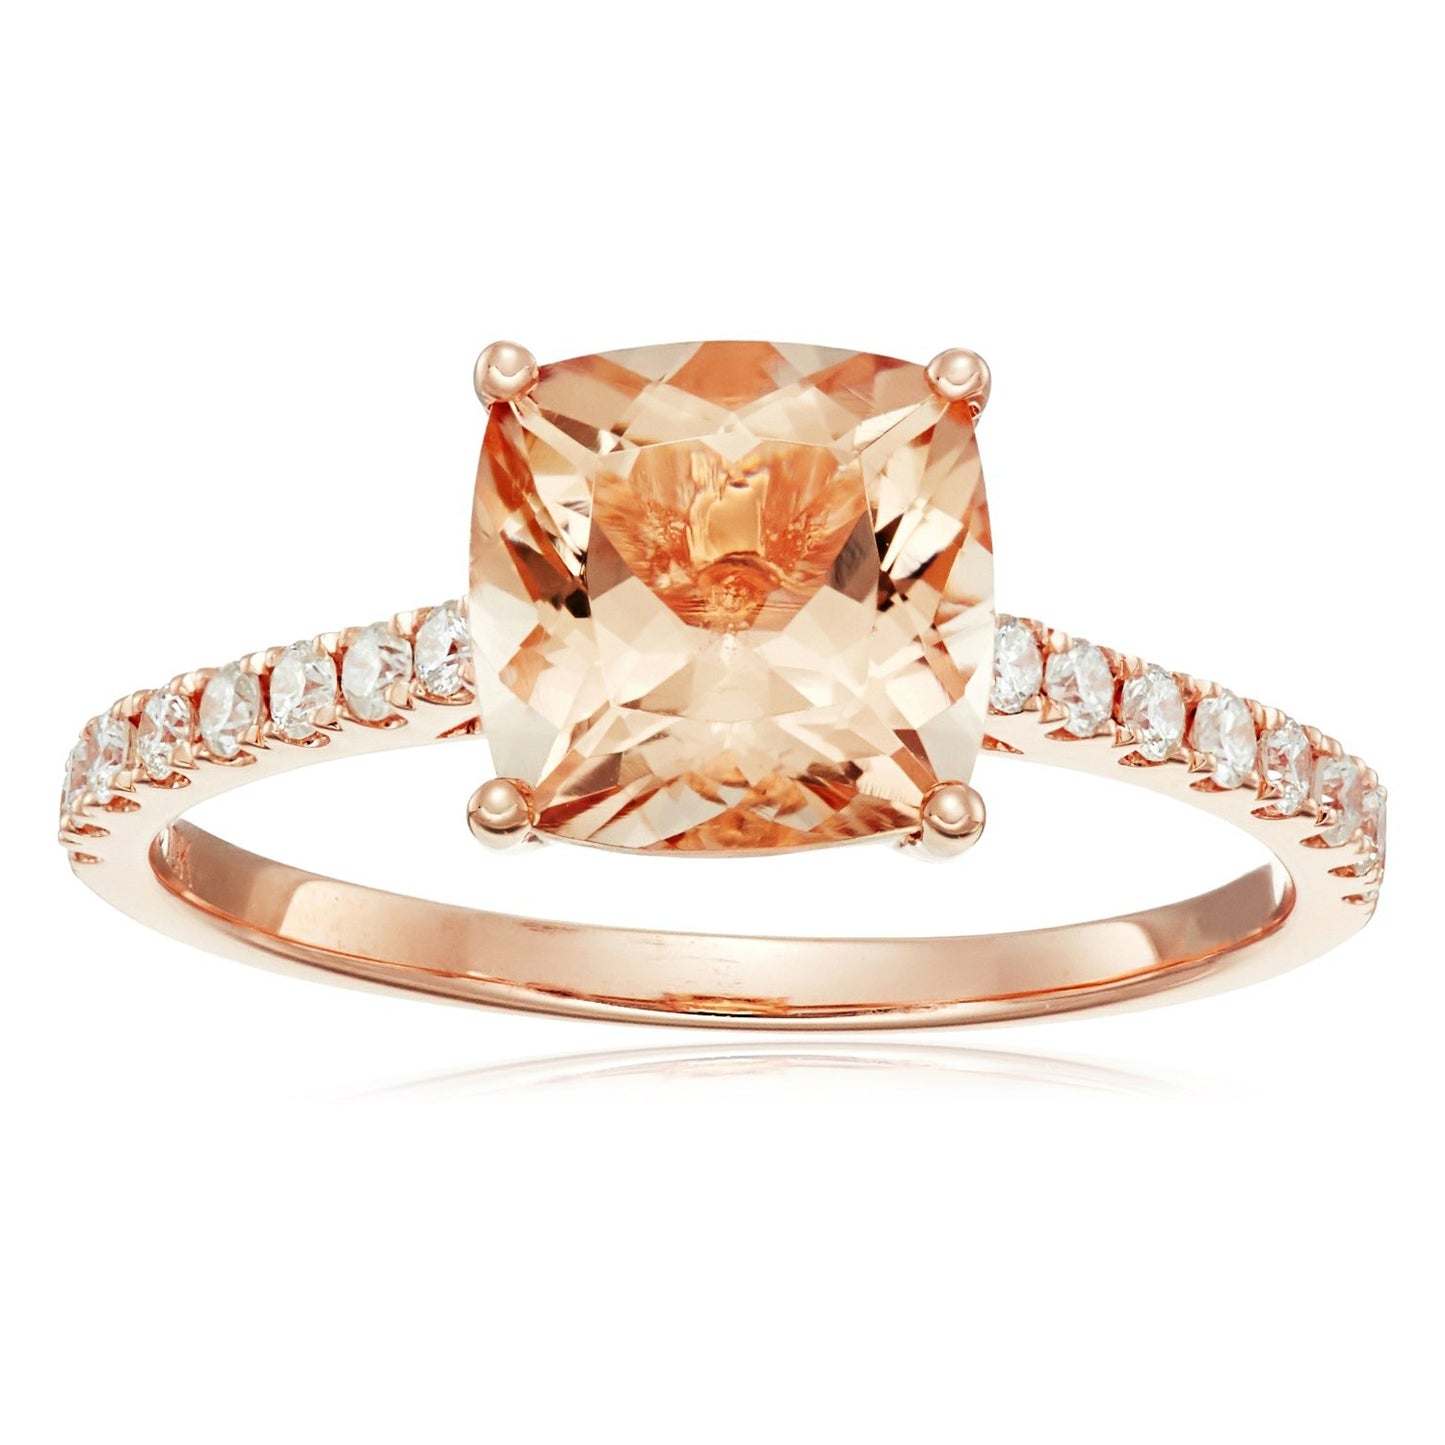 10k Rose Gold Morganite Cushion and Diamond Solitaire Ring (1/4 cttw H-I Color, I1-I2 Clarity), - pinctore